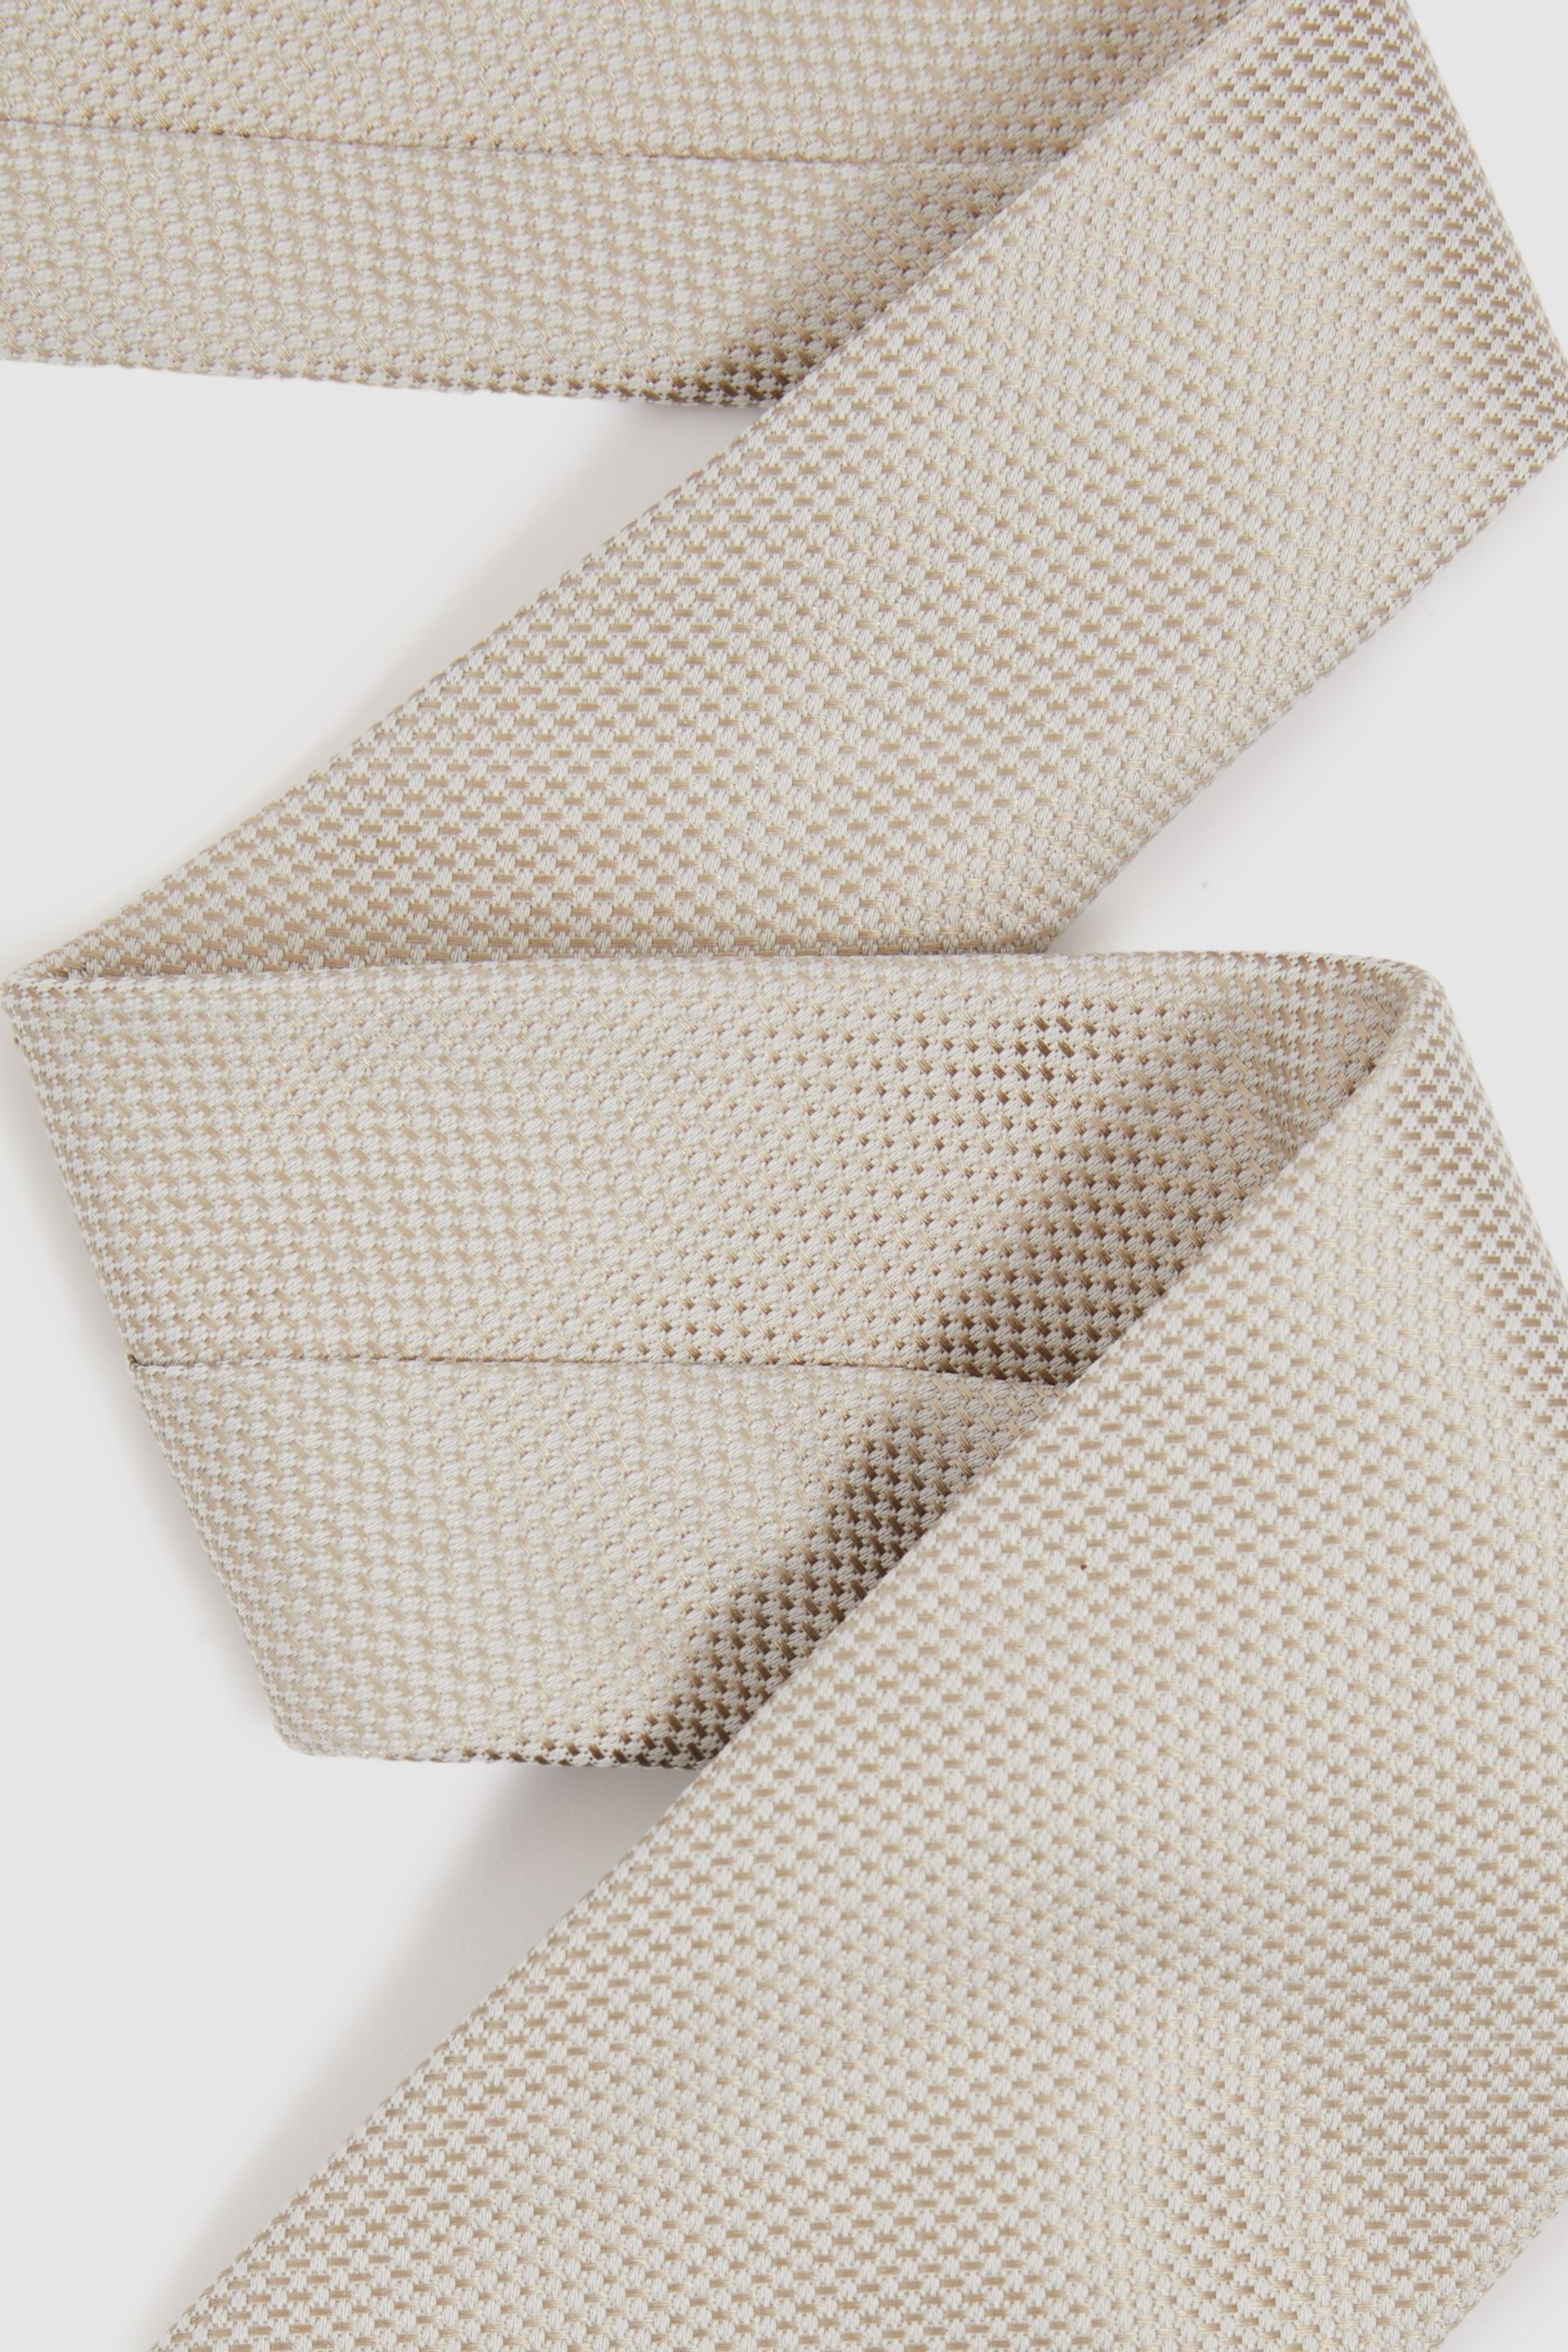 Reiss Champagne Ceremony Textured Silk Blend Tie - Image 3 of 5